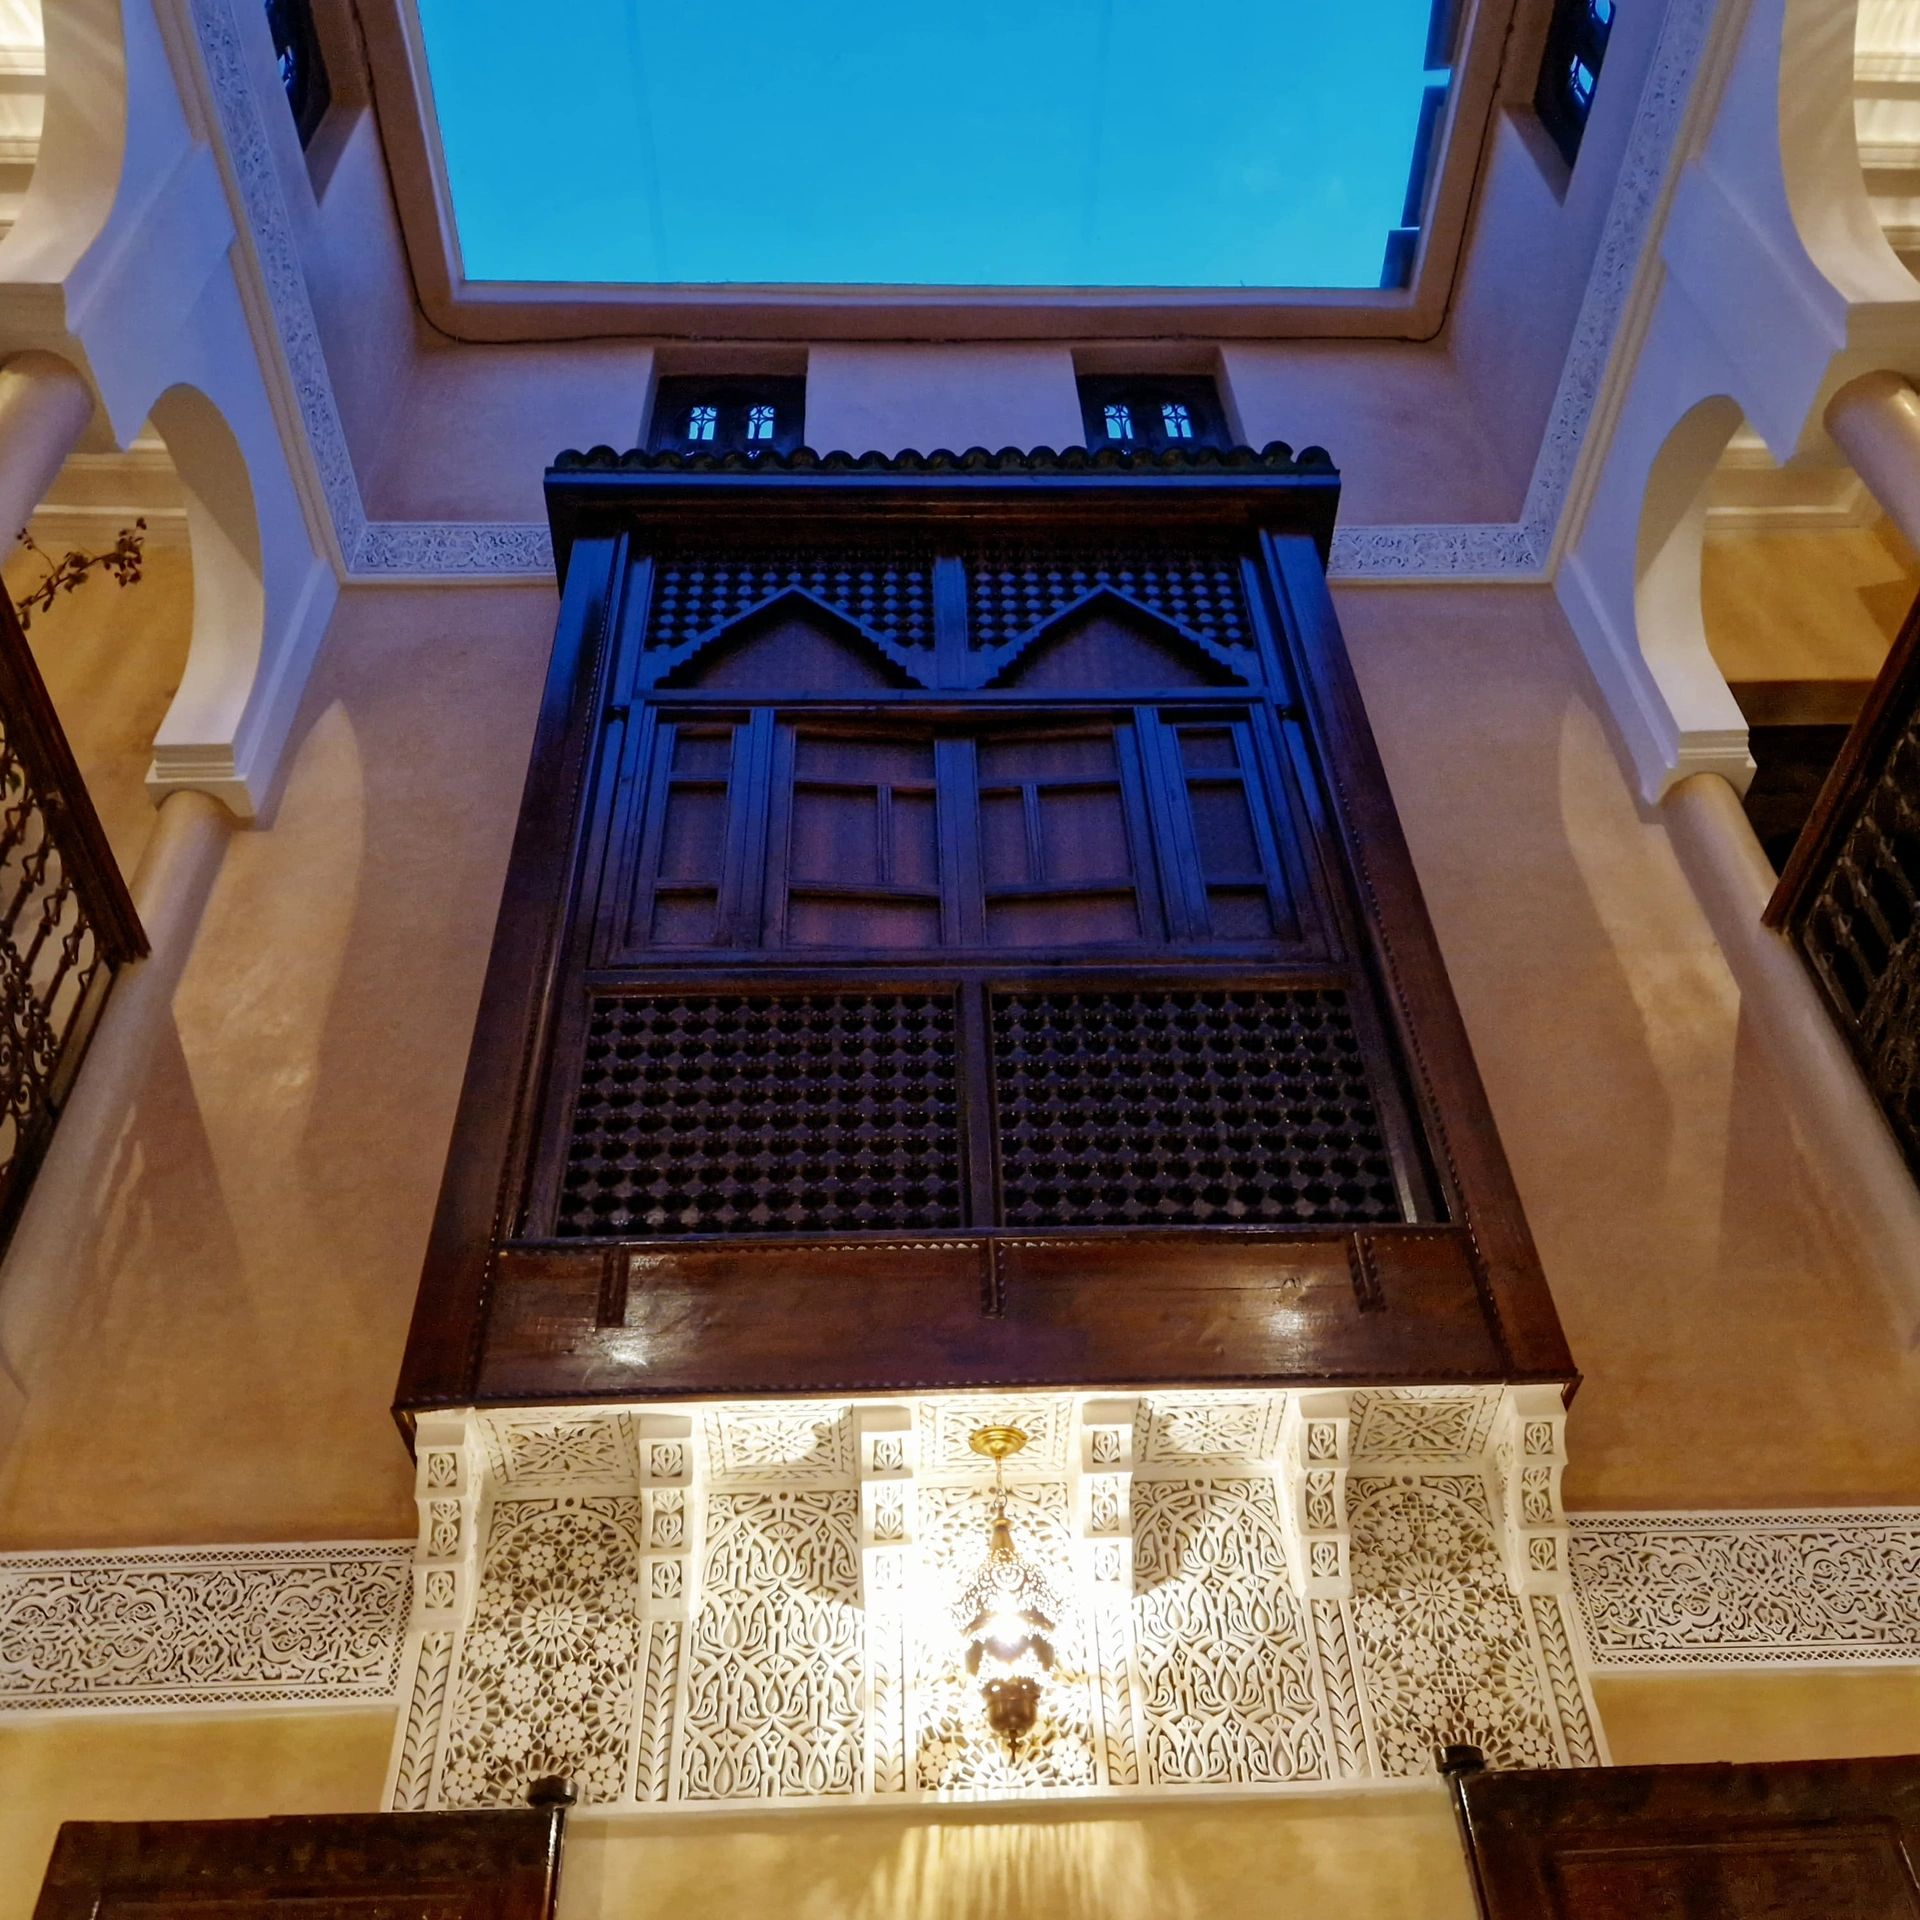 Surrounded by the beauty of traditional Moroccan architecture, lush greenery,